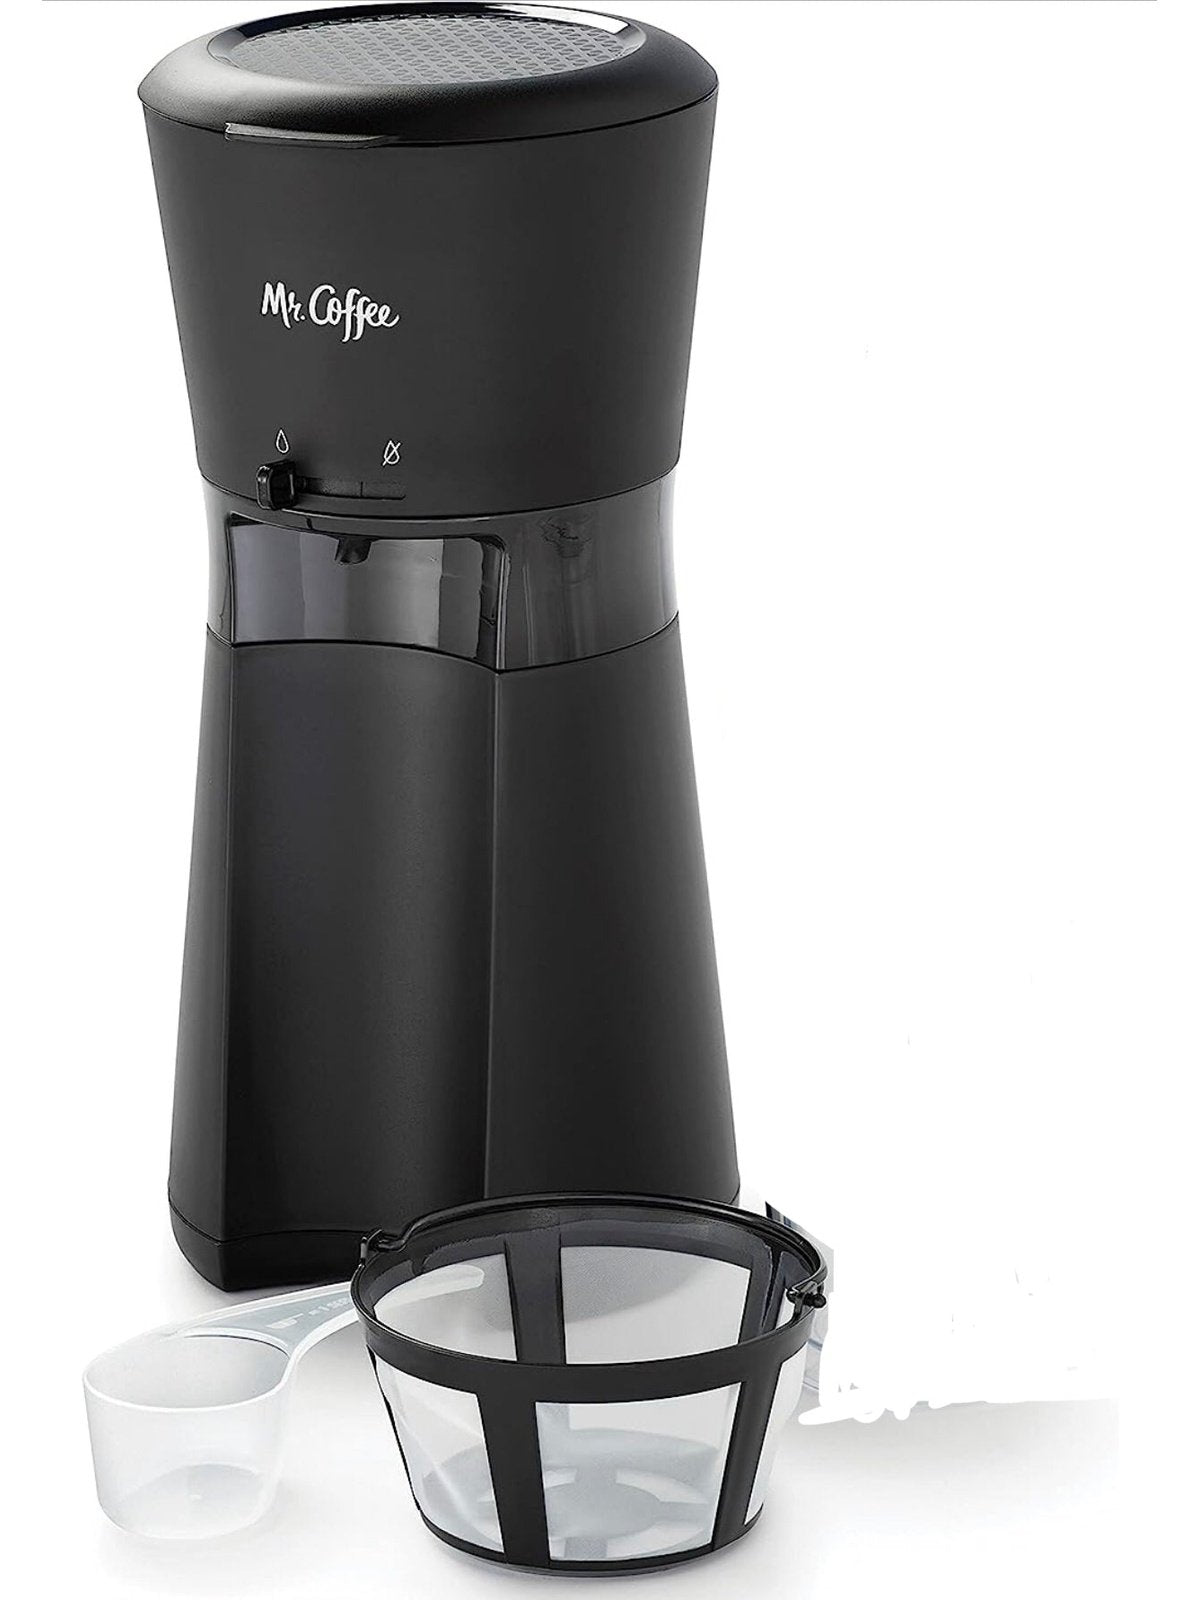 Mr. Coffee Iced Coffee Maker, Single Serve Machine with Reusable Coffee Filter, Black